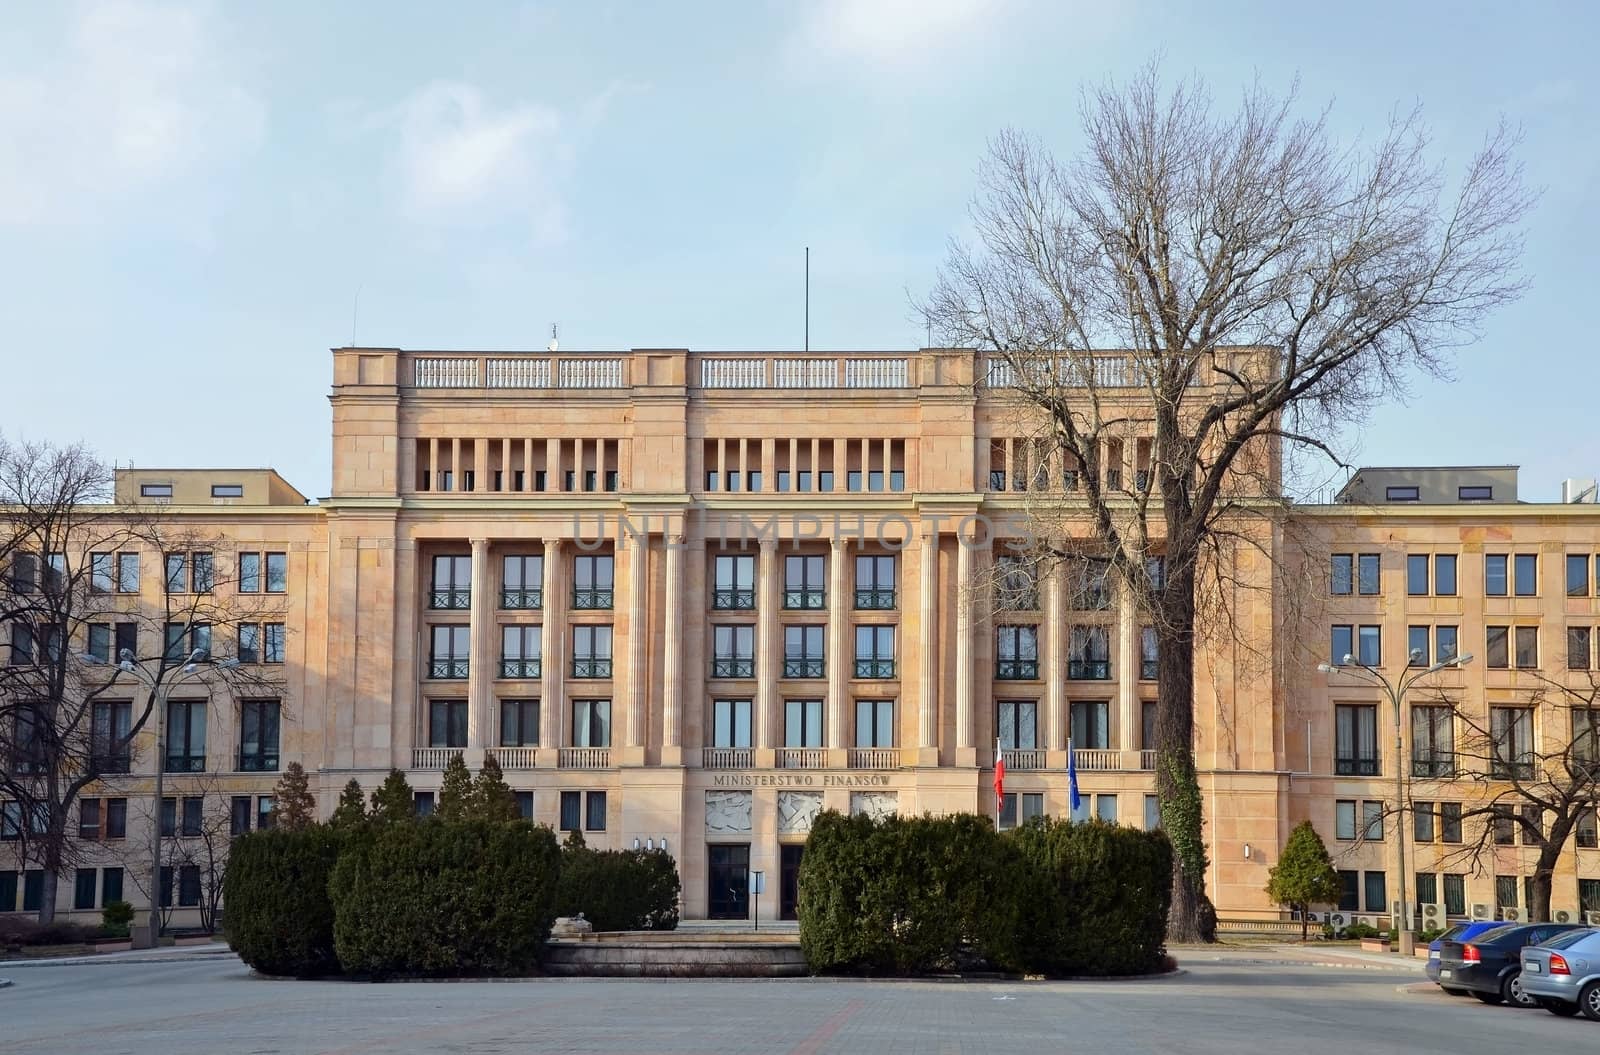 Ministry of finance and treasury of Poland by Vectorex